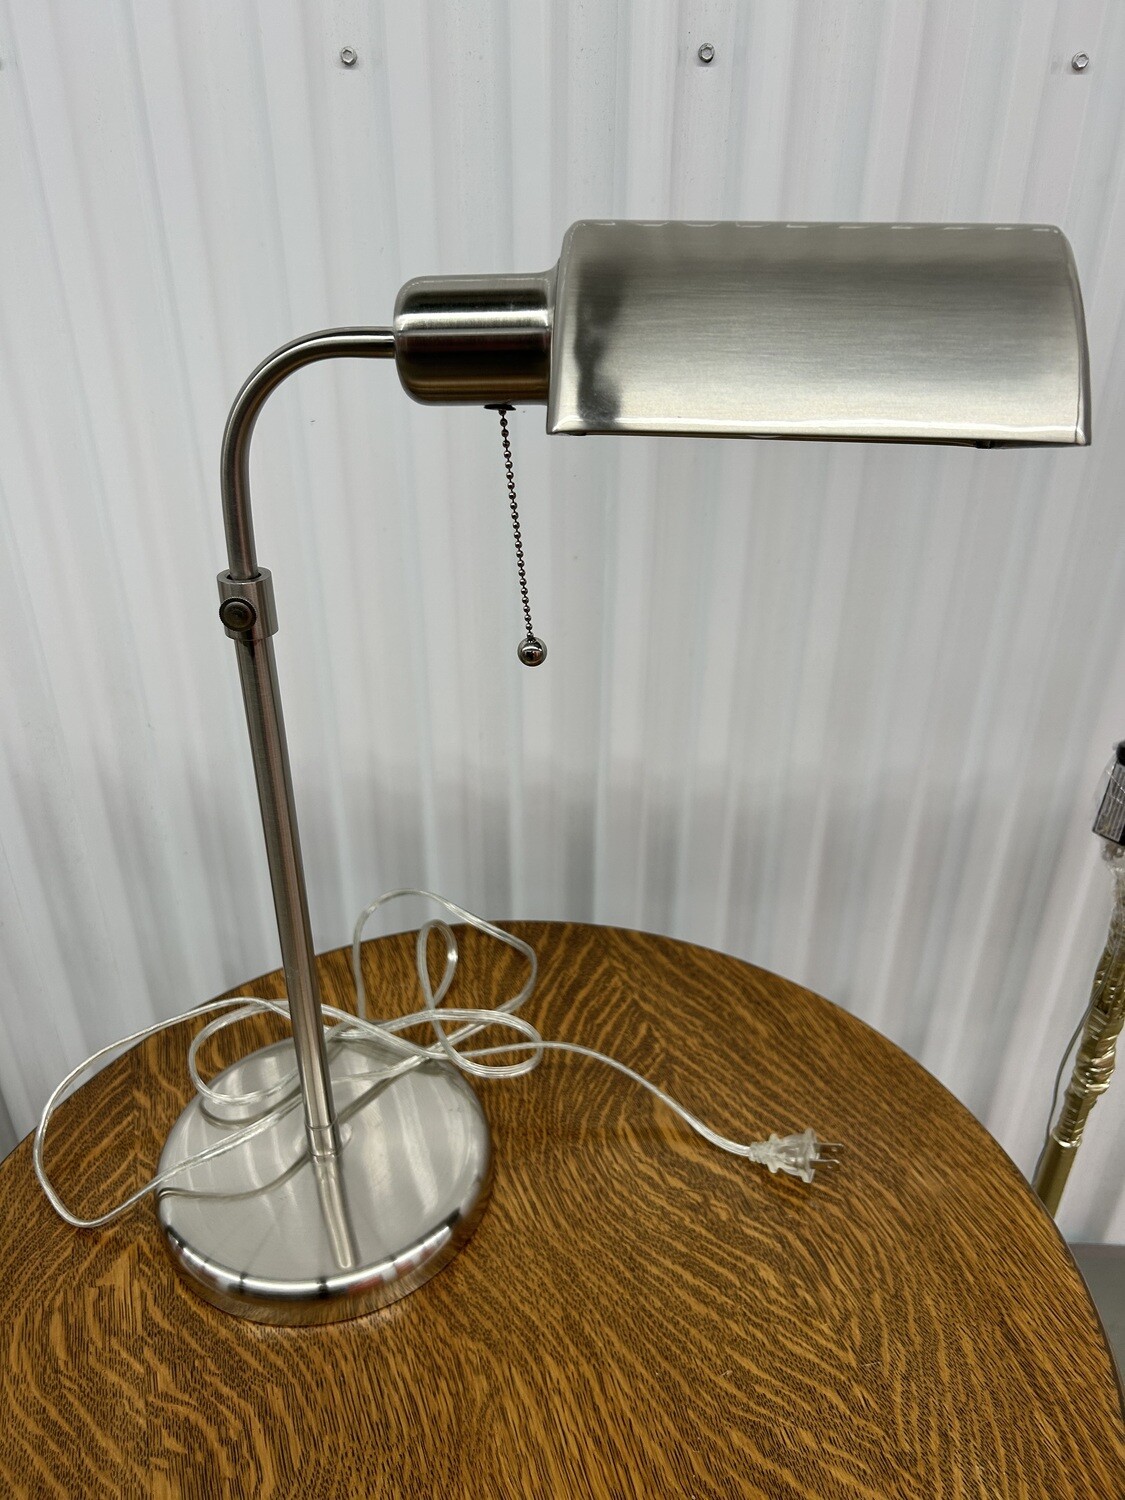 Like New! Desk Lamp, brushed nickel #2213 ** 6 mos. to sell, clearance